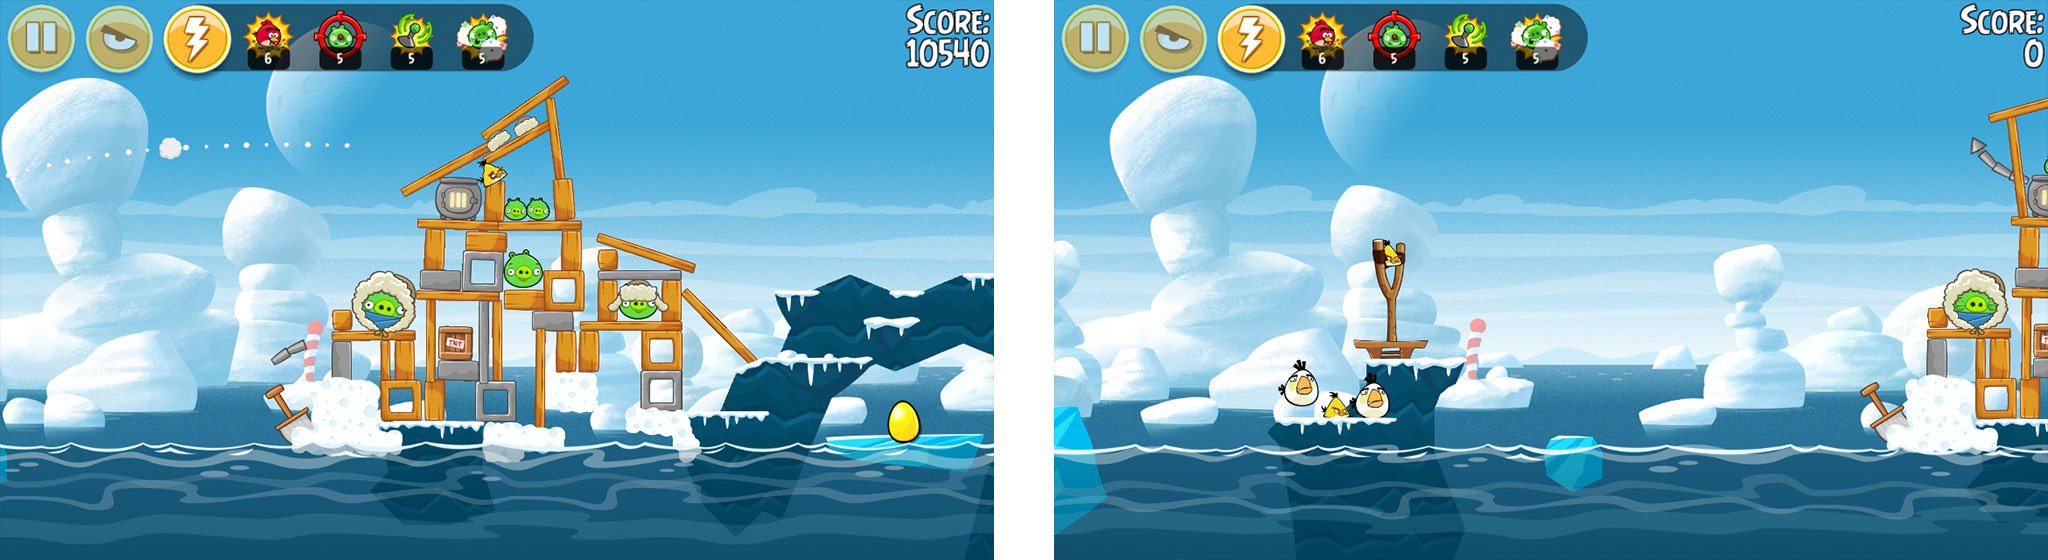 Best apps and games to celebrate the holiday season: Angry Birds Seasons